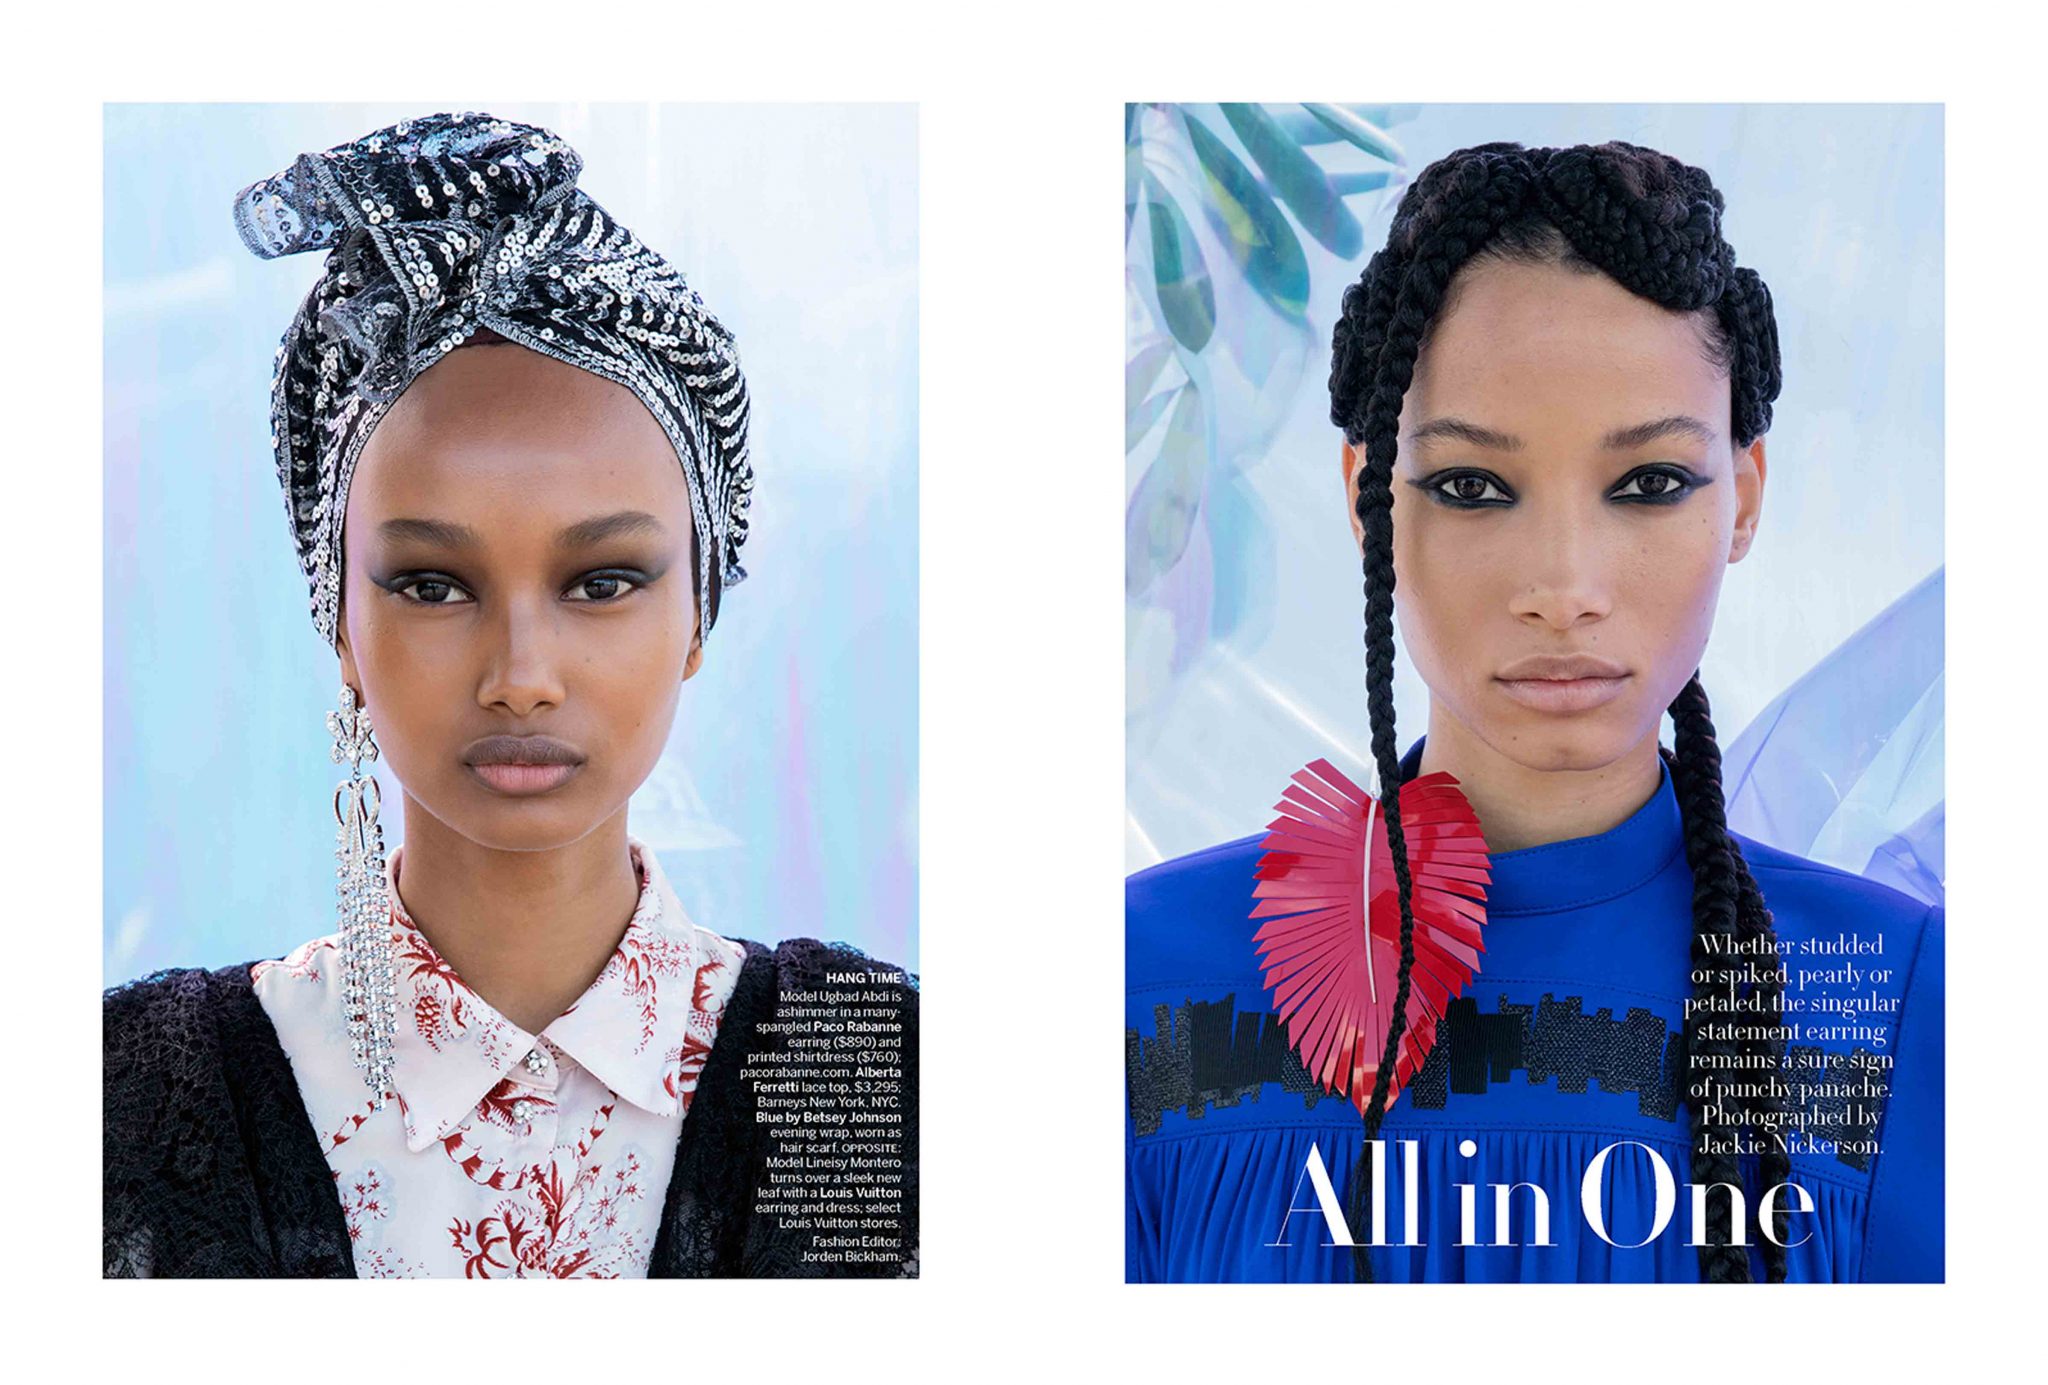  | American Vogue: All in One | 1